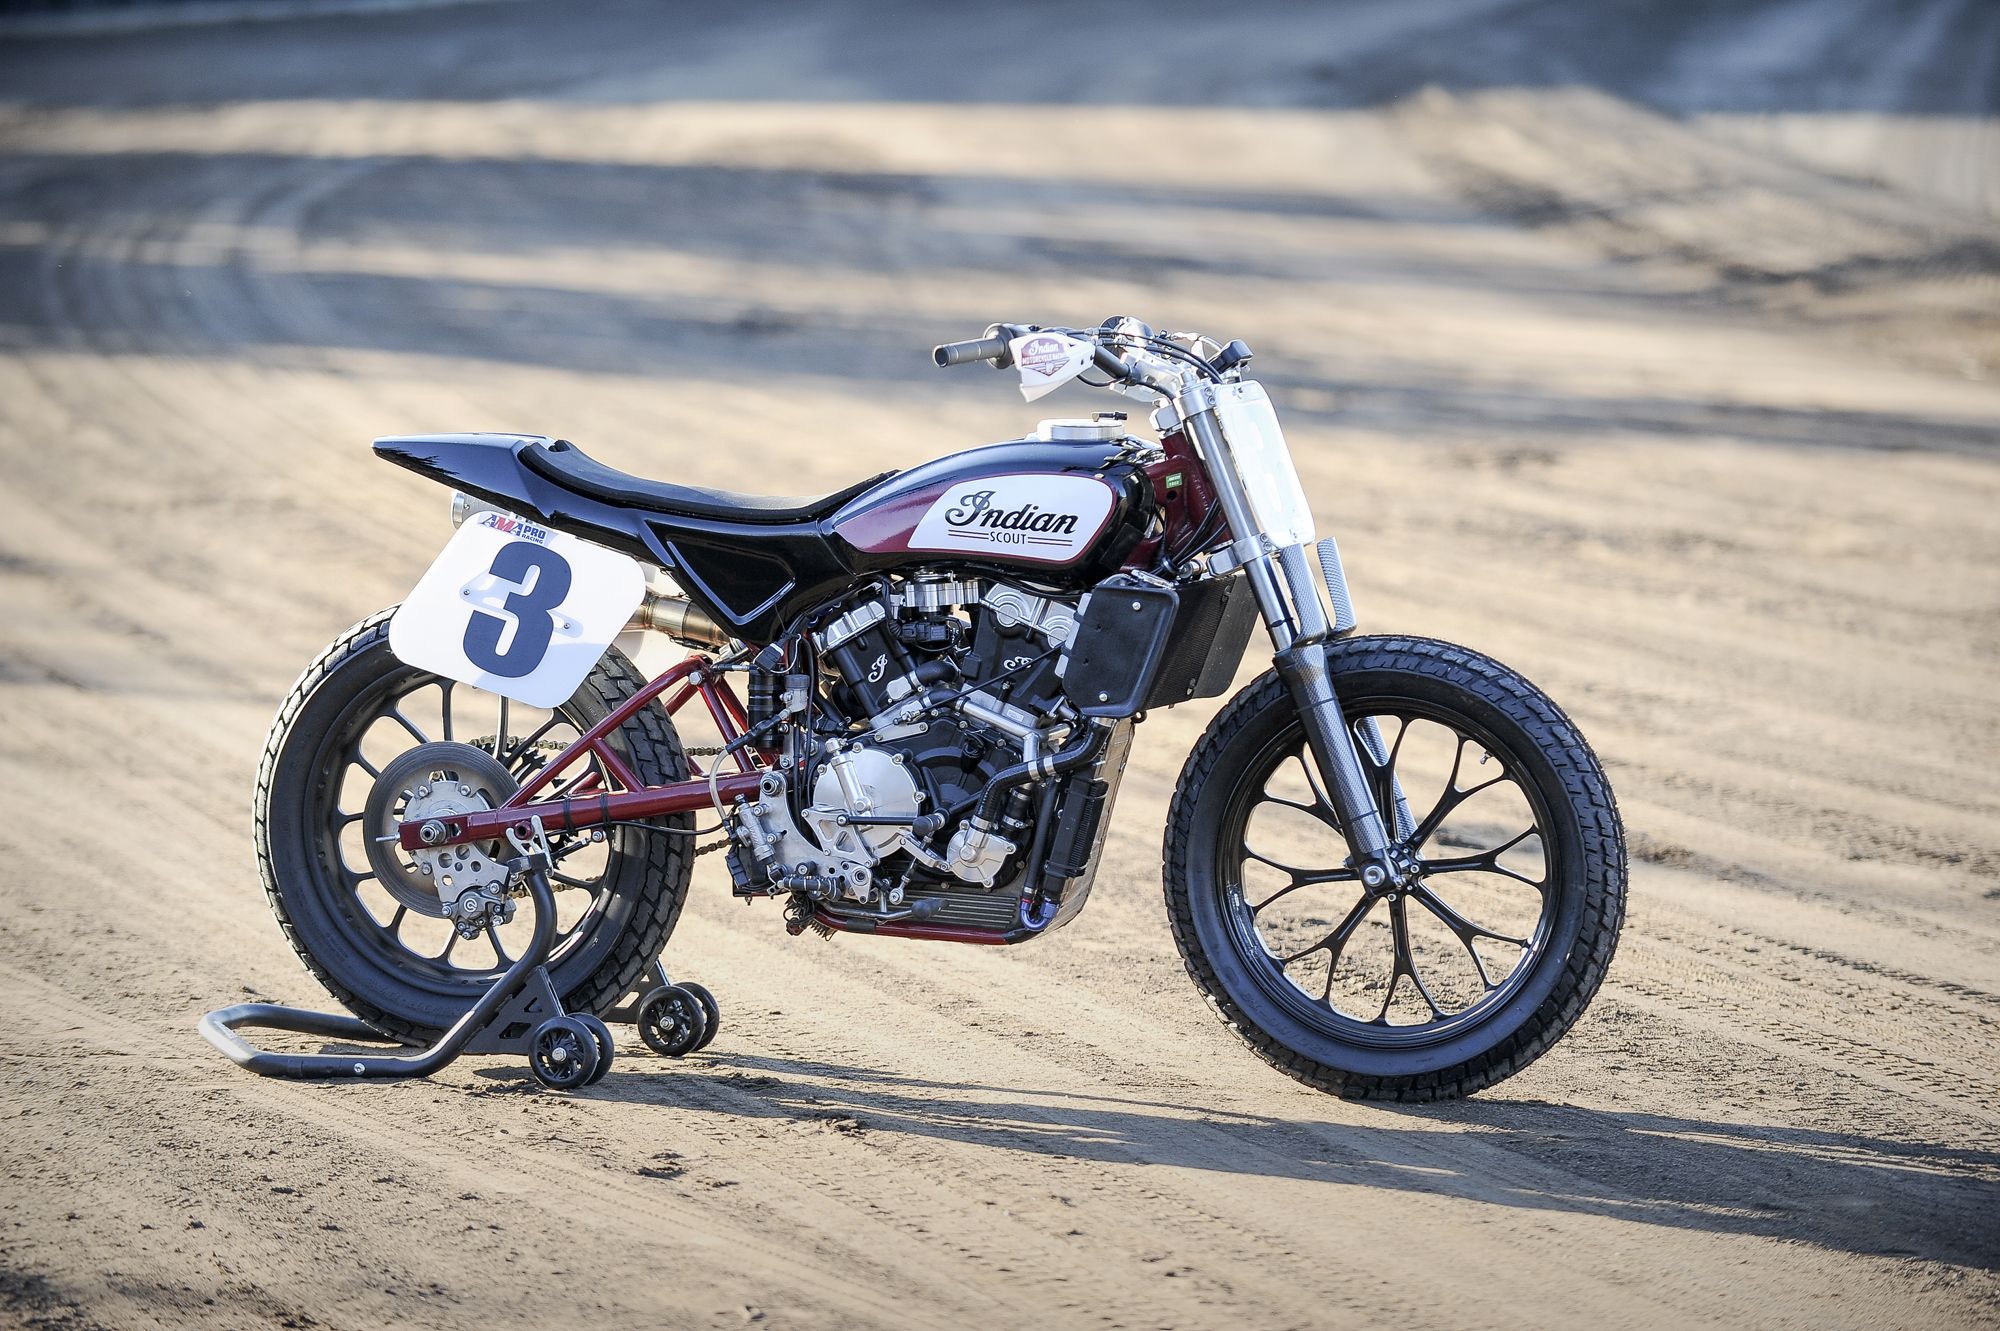 Indian S Scout Ftr750 Pro Flat Track Motorcycle Is Now Publicly Available Motorcyclist